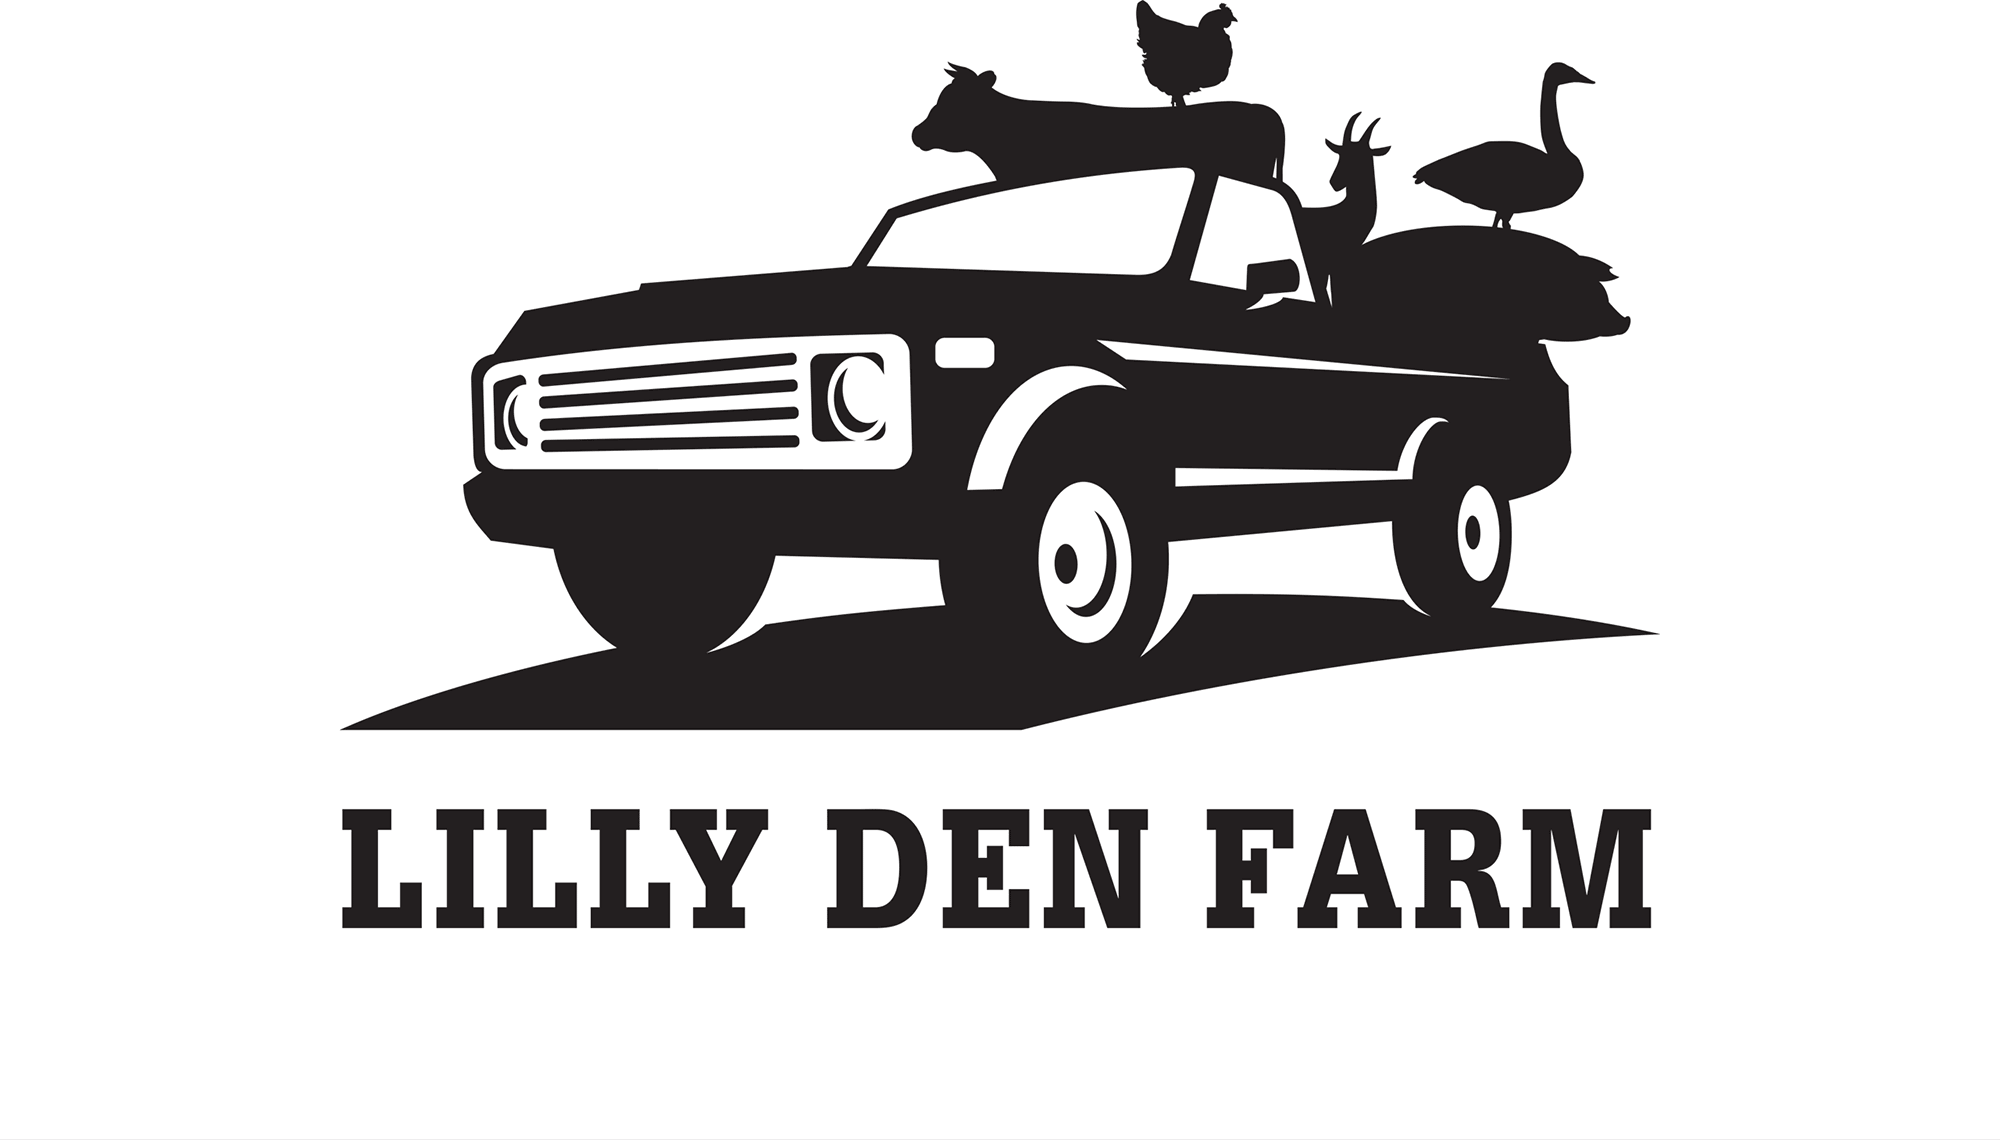 Lilly Den Farm Black Logo - Pickup truck with animals in back and uppercase serif type below